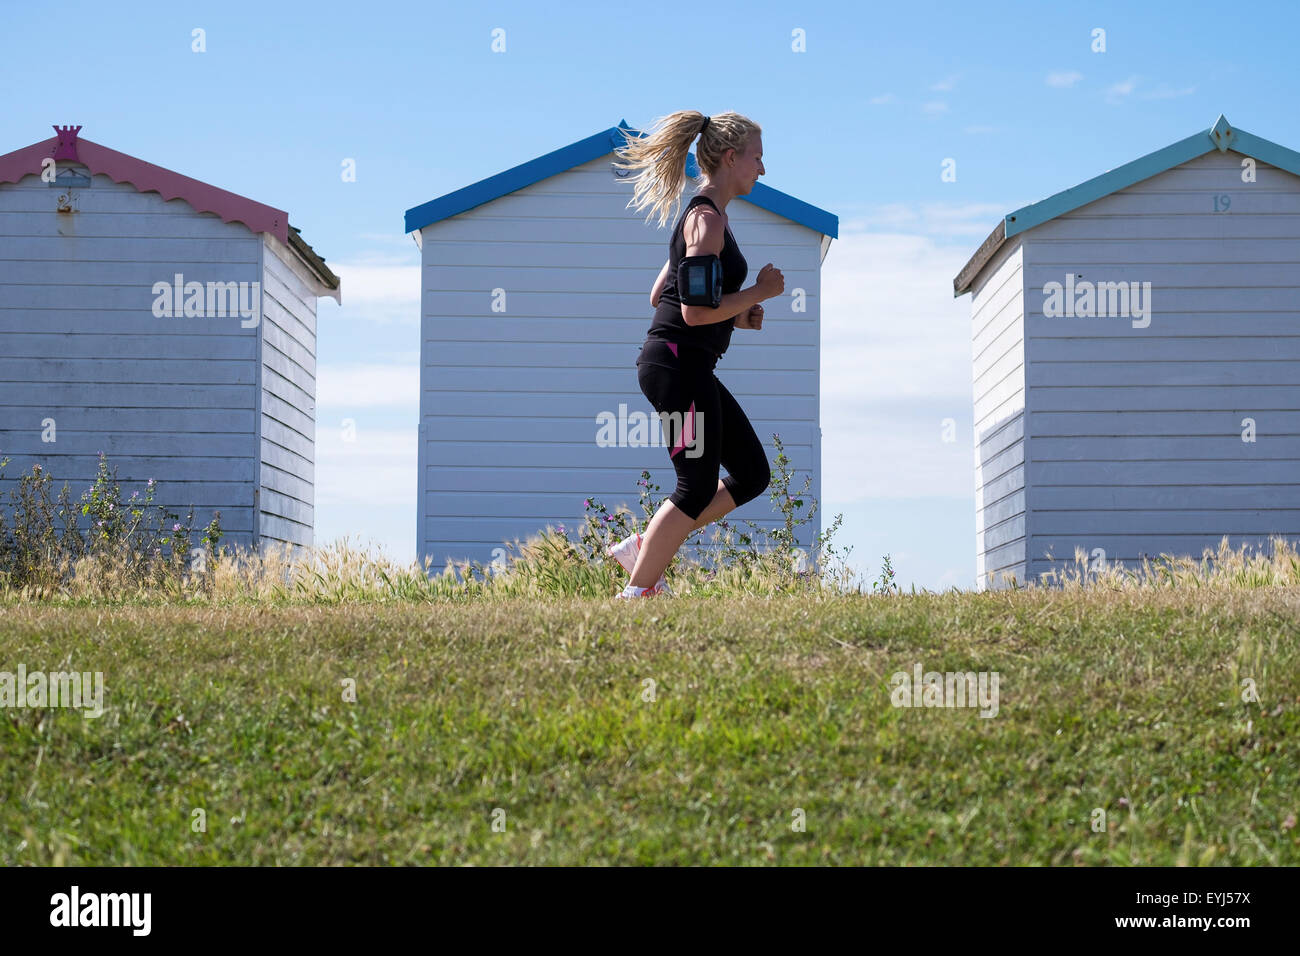 Young woman with tied back hair blonde dreadlocks wearing short leggings running along seafront past row of beach huts Stock Photo